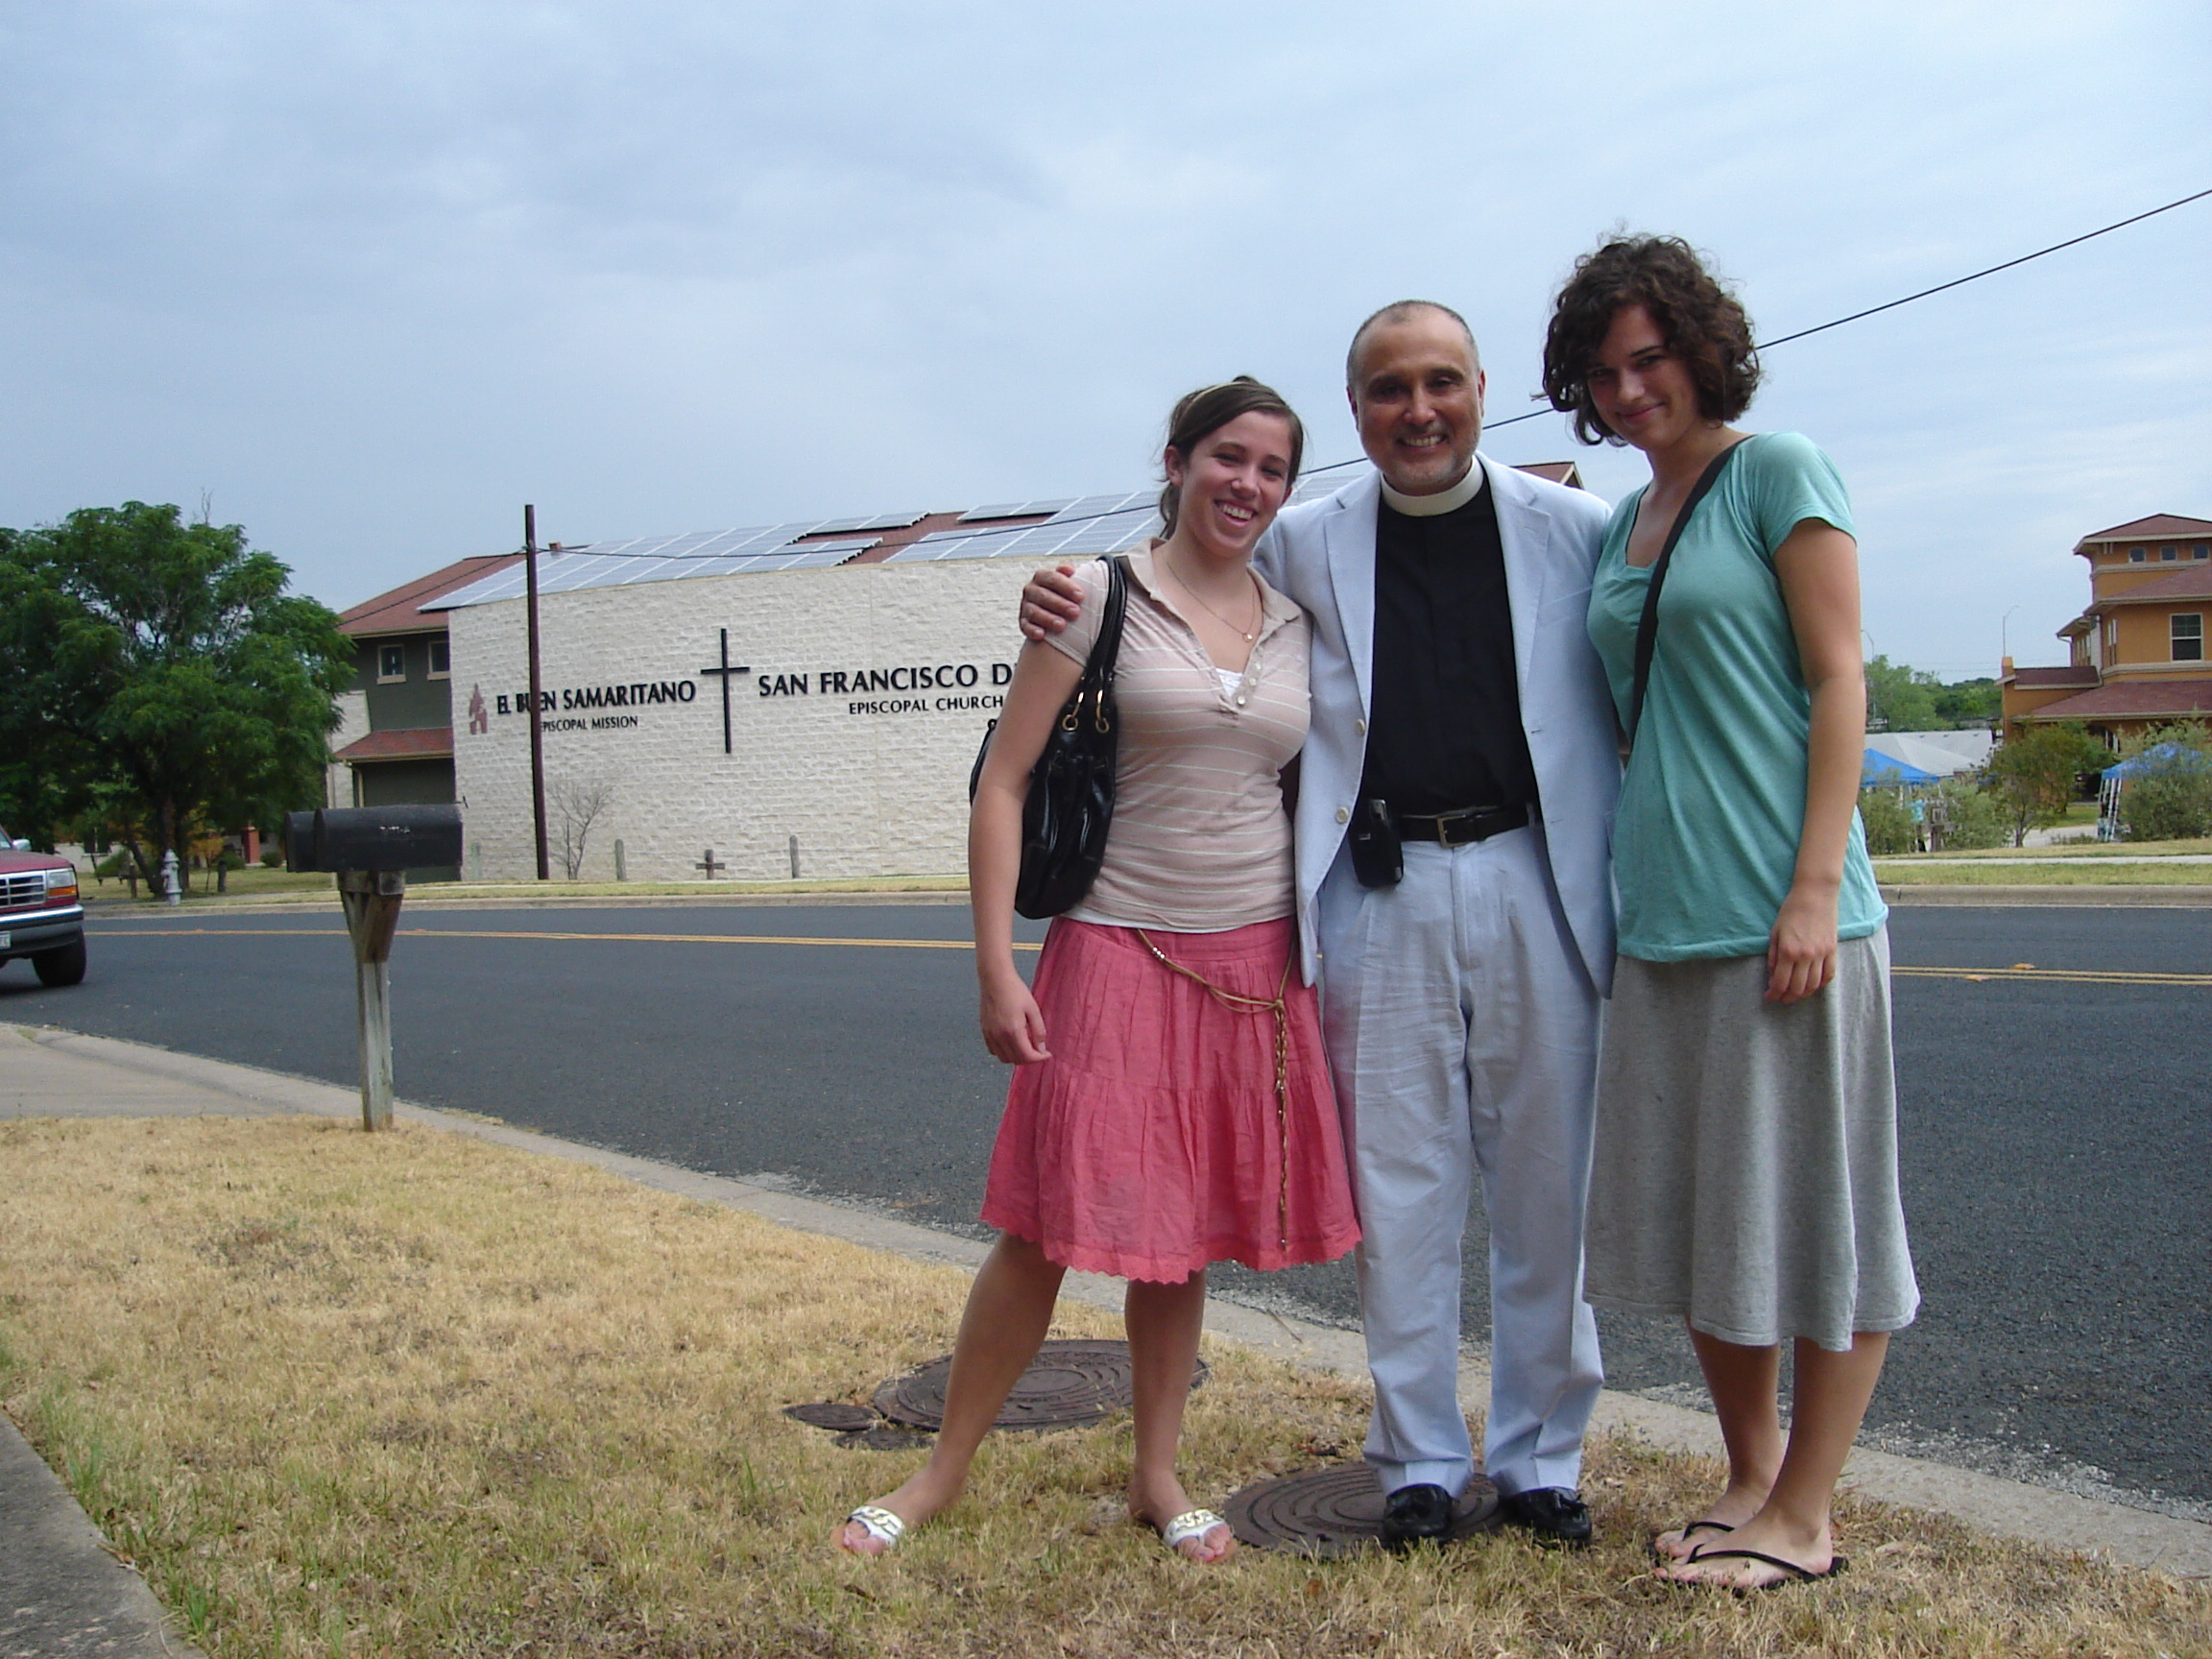 Adrien and I with Reverend Jose Palma--if you look closely you can see the solar panels forming a cross on the roof of the church building behind us